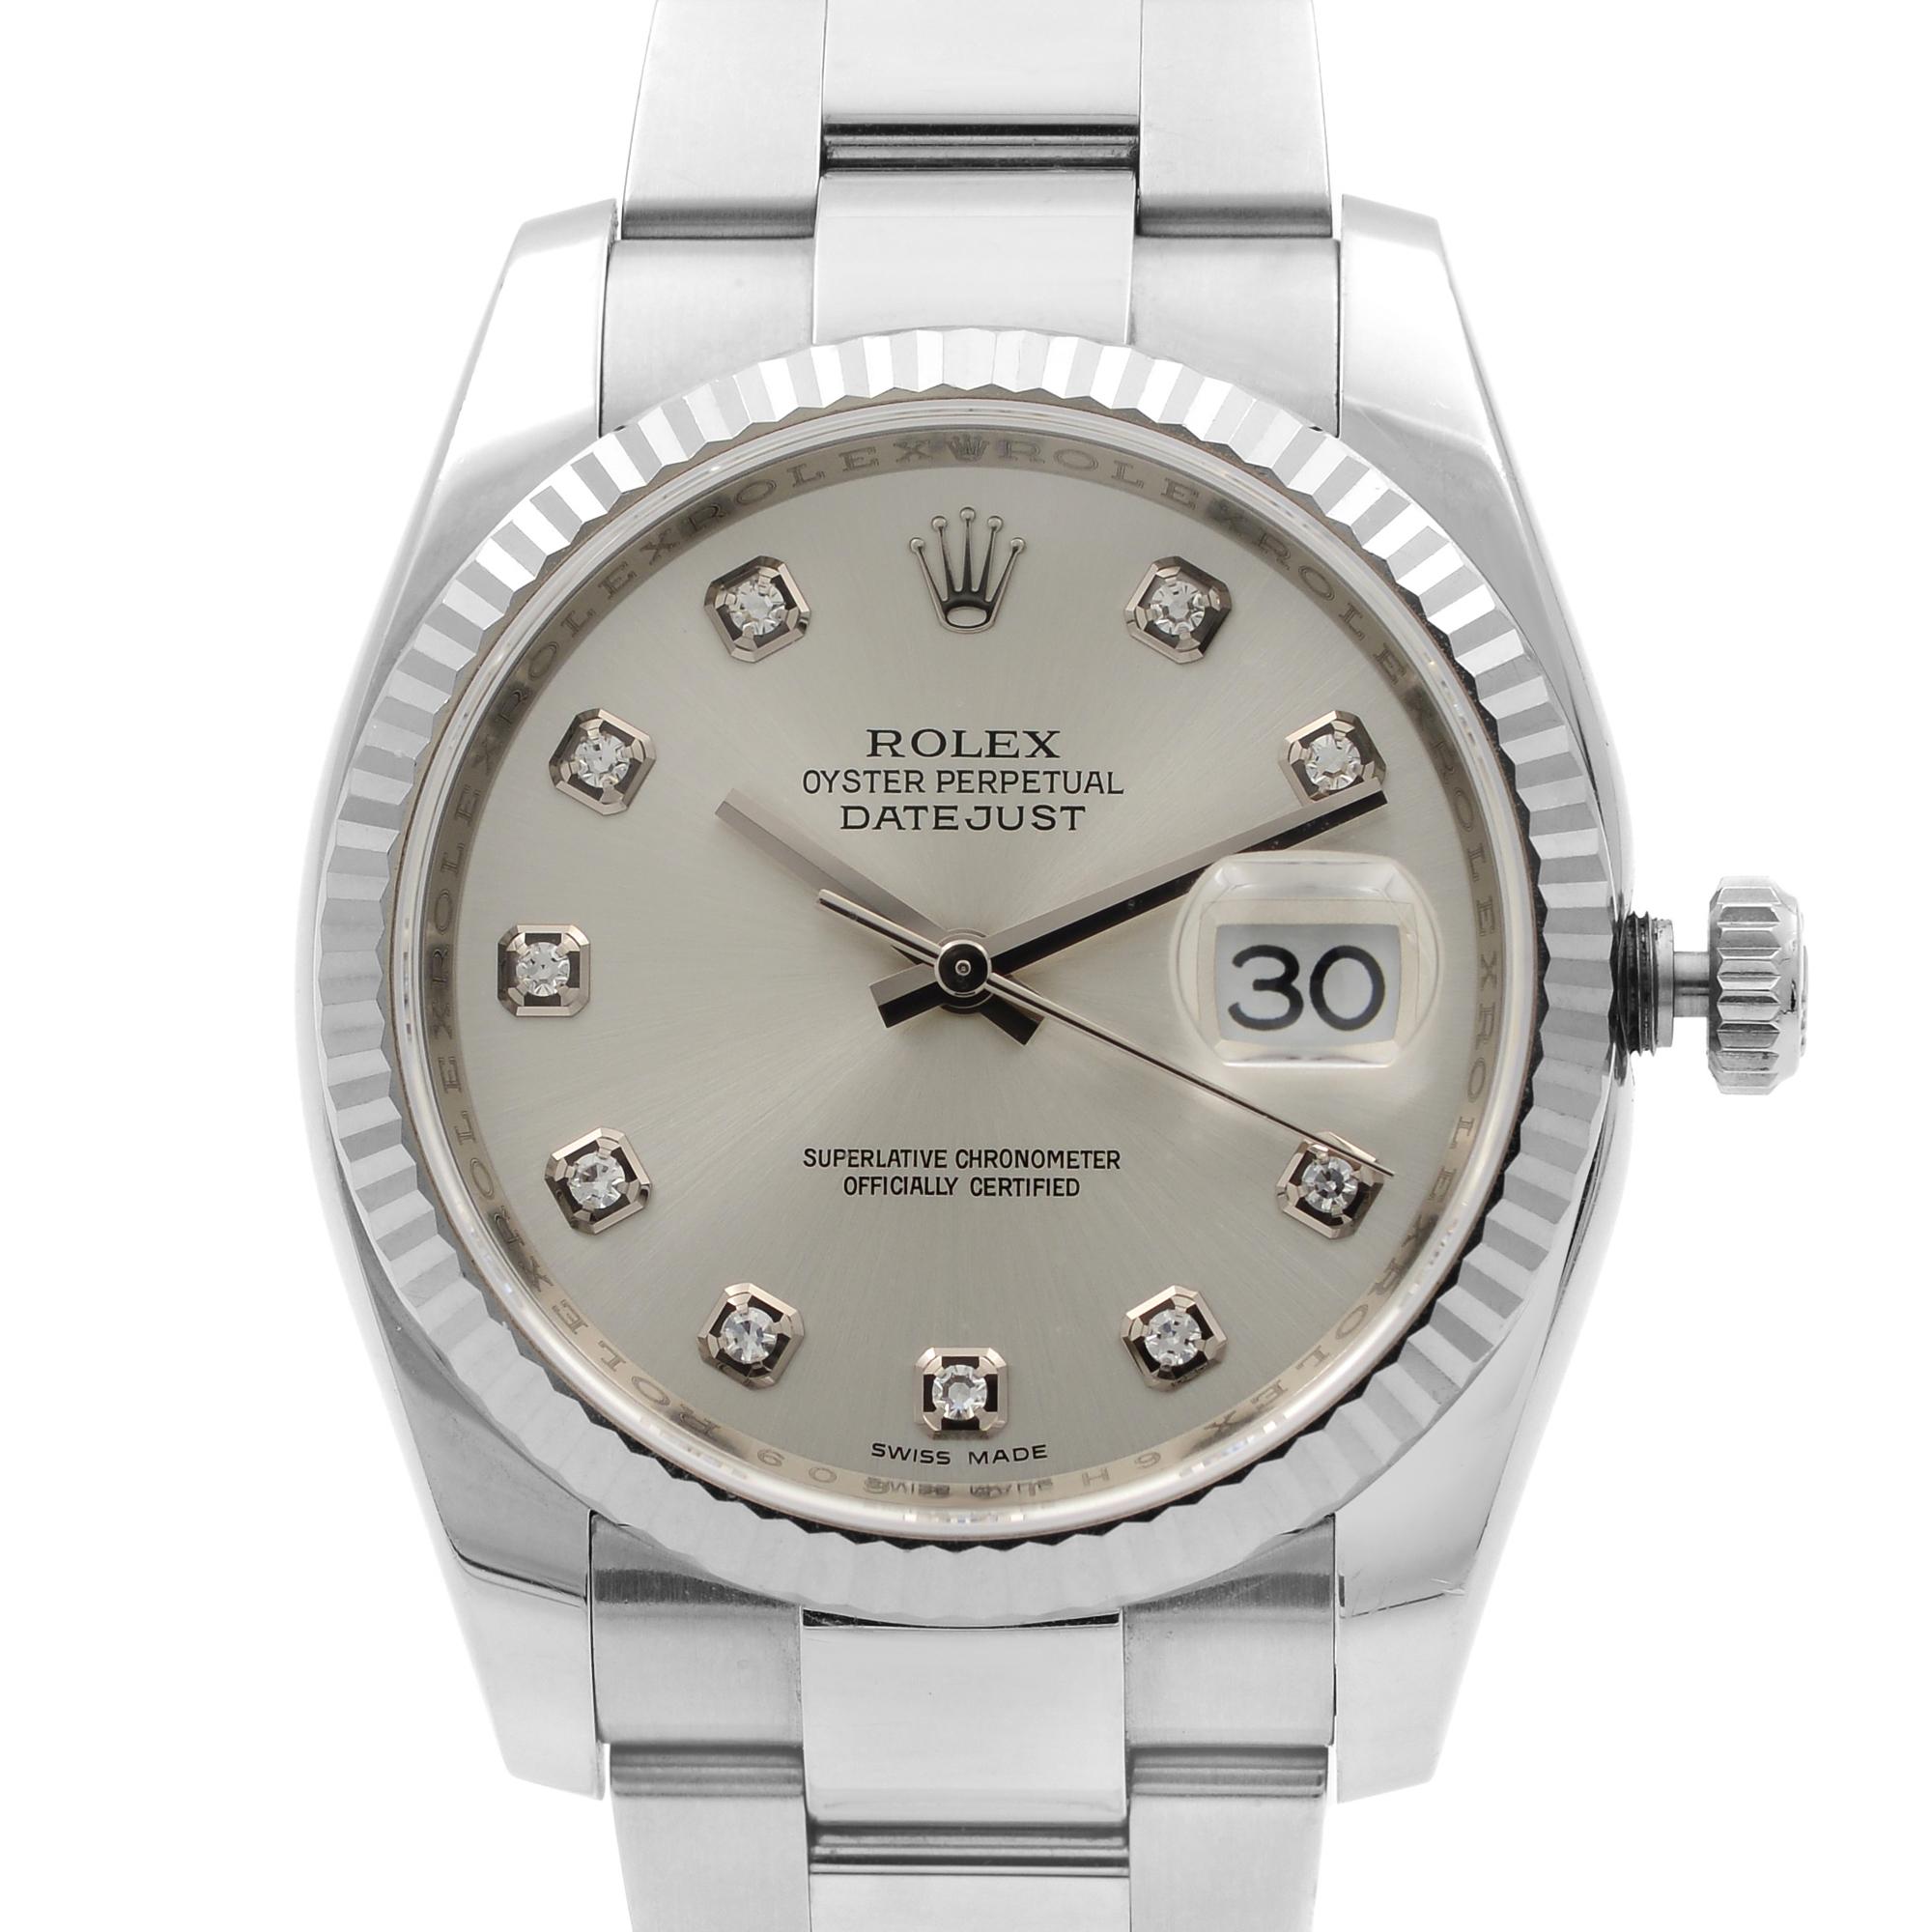 Factory Diamond Dial. 2012 Card Warranty Card. Rolex Serial tag and Rolex Tag is also included.  Comes with Original Box and Papers. Covered By 3 Year Chronostore Warranty.
Details:
Model Number 116234
Brand Rolex
Department Men
Style Dress/Formal,